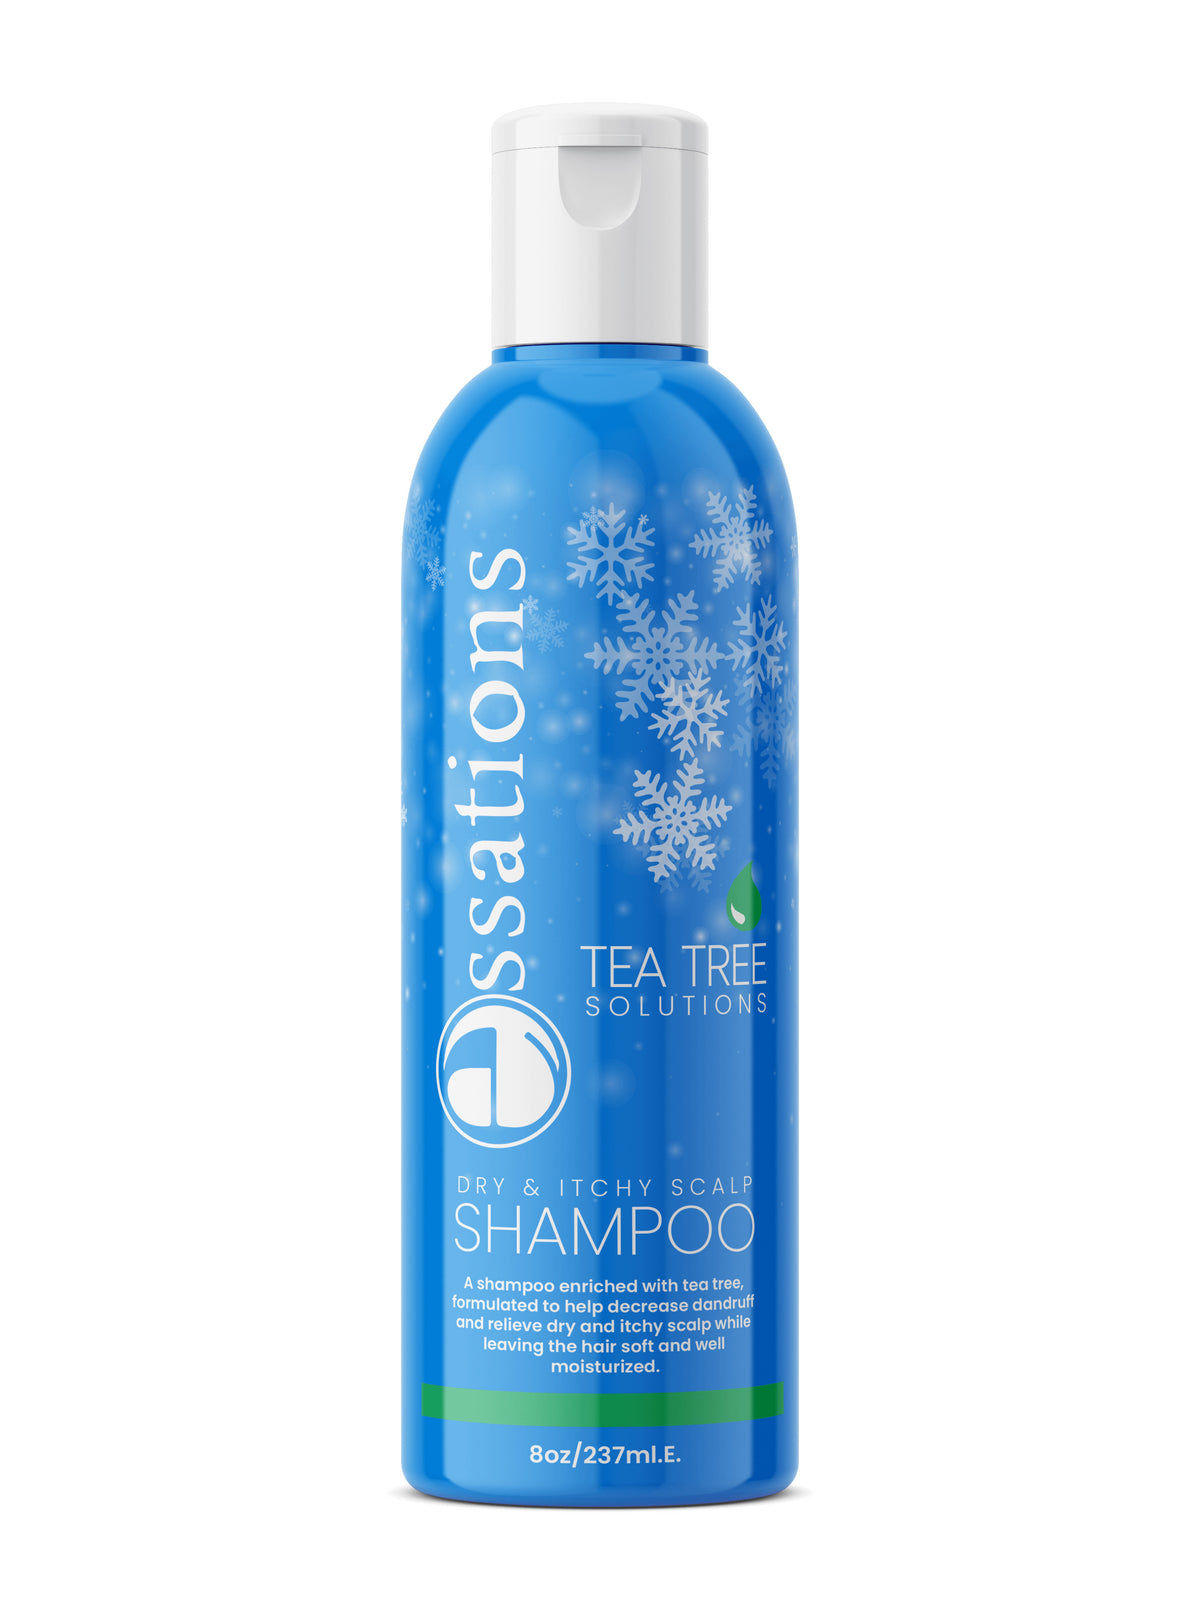 Tea Tree Solutions Dry & Itchy Scalp Holiday Bundle